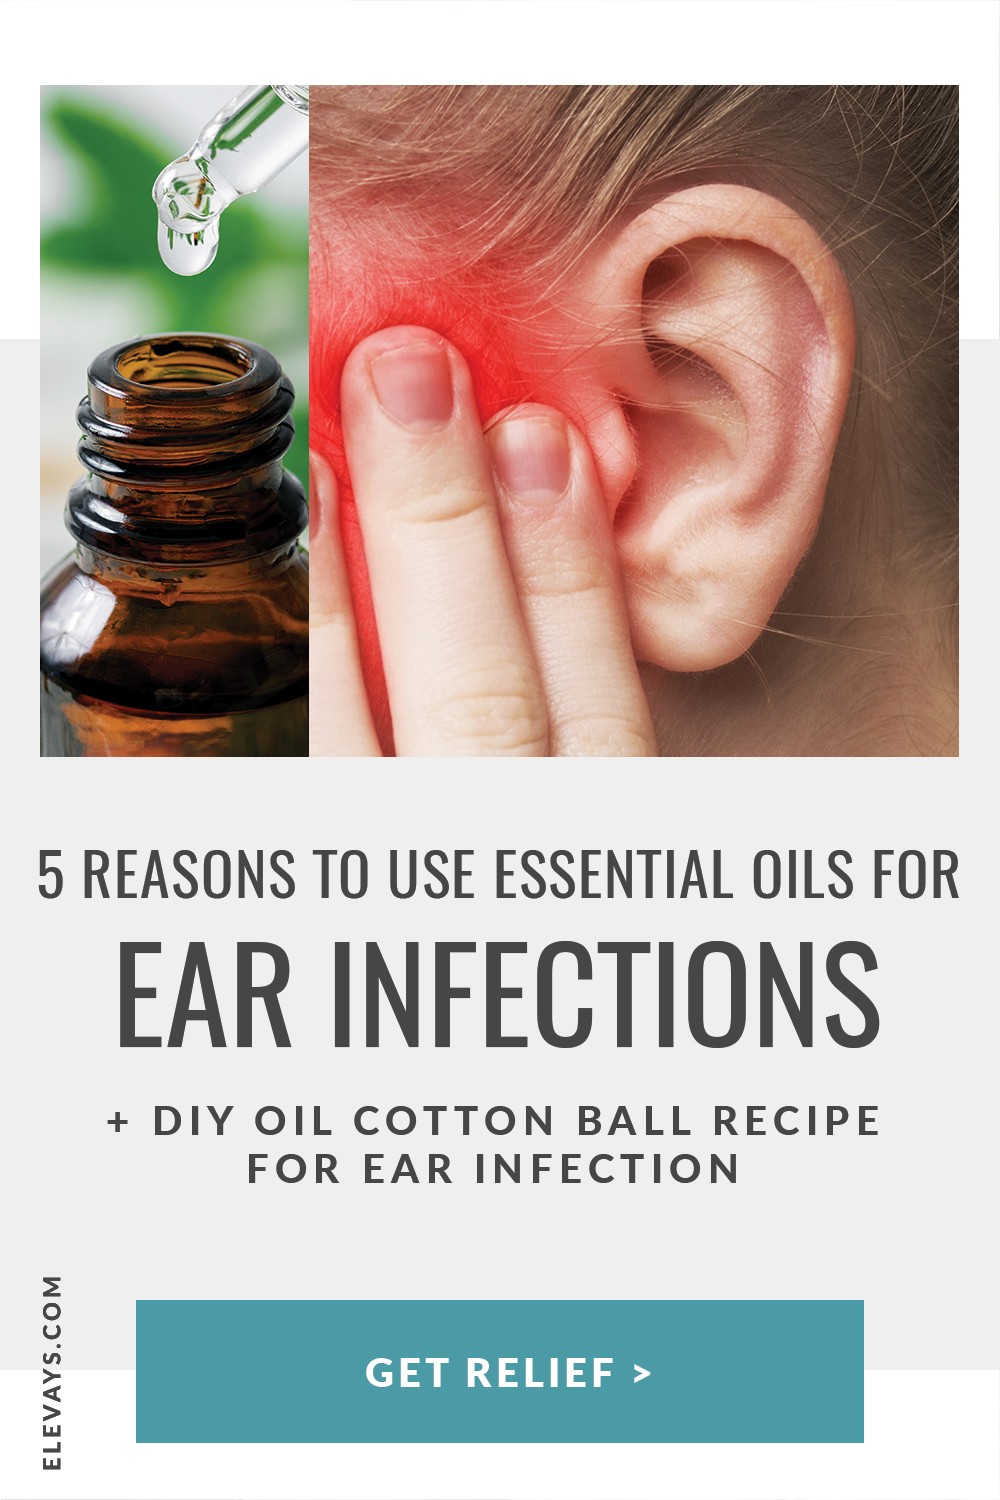 5 Reasons to Use Essential Oils for an Ear Infection